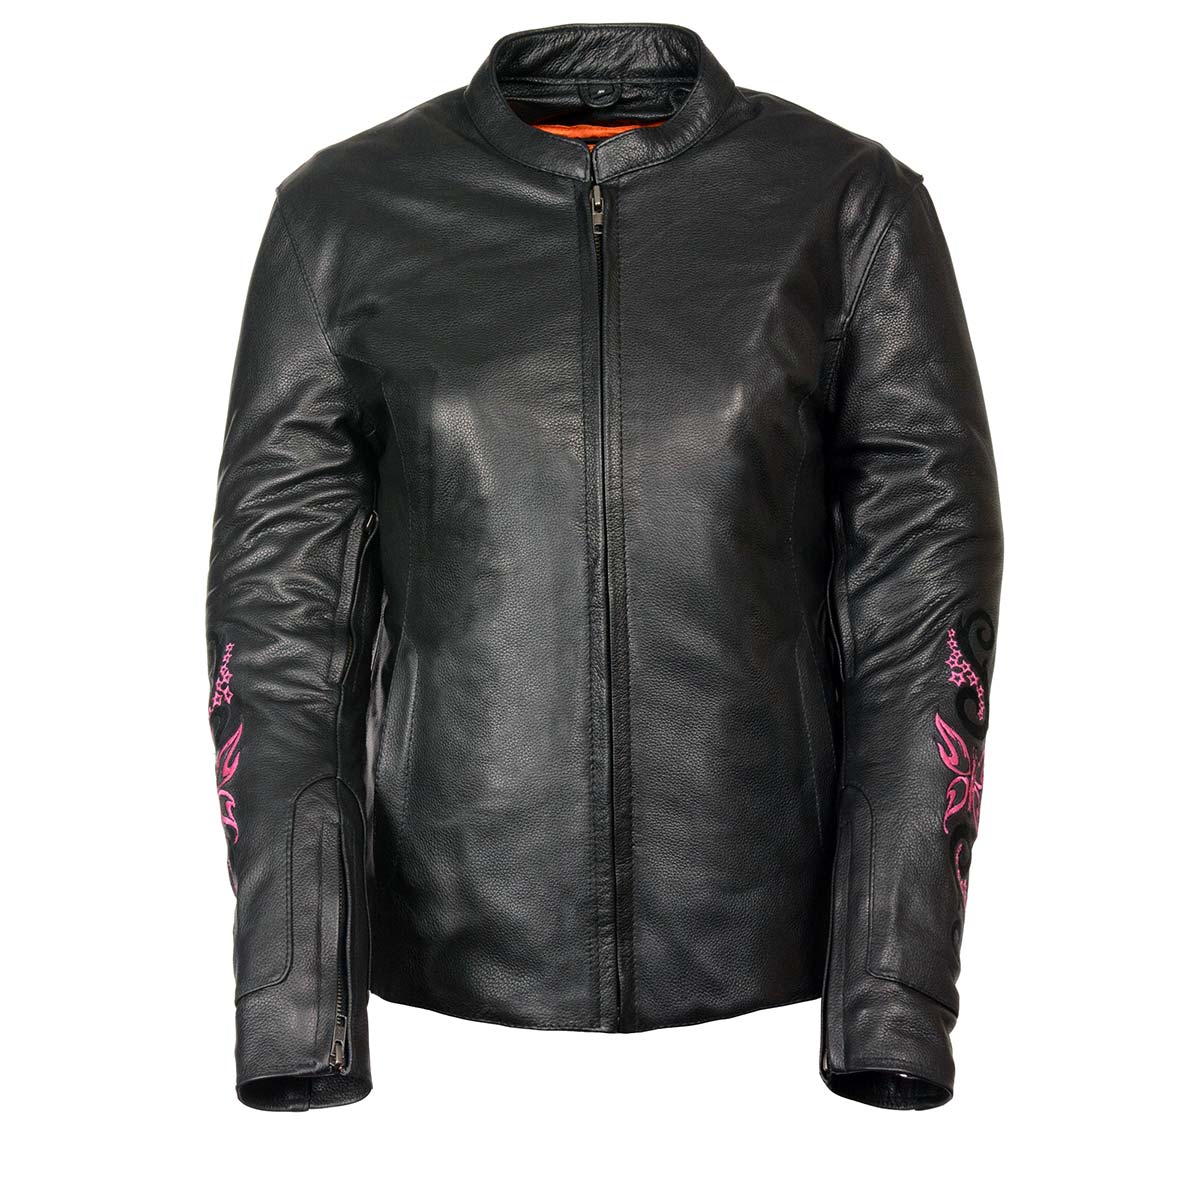 Milwaukee Leather ML2071 Ladies Black Leather Jacket with Fuchsia Butterfly Design